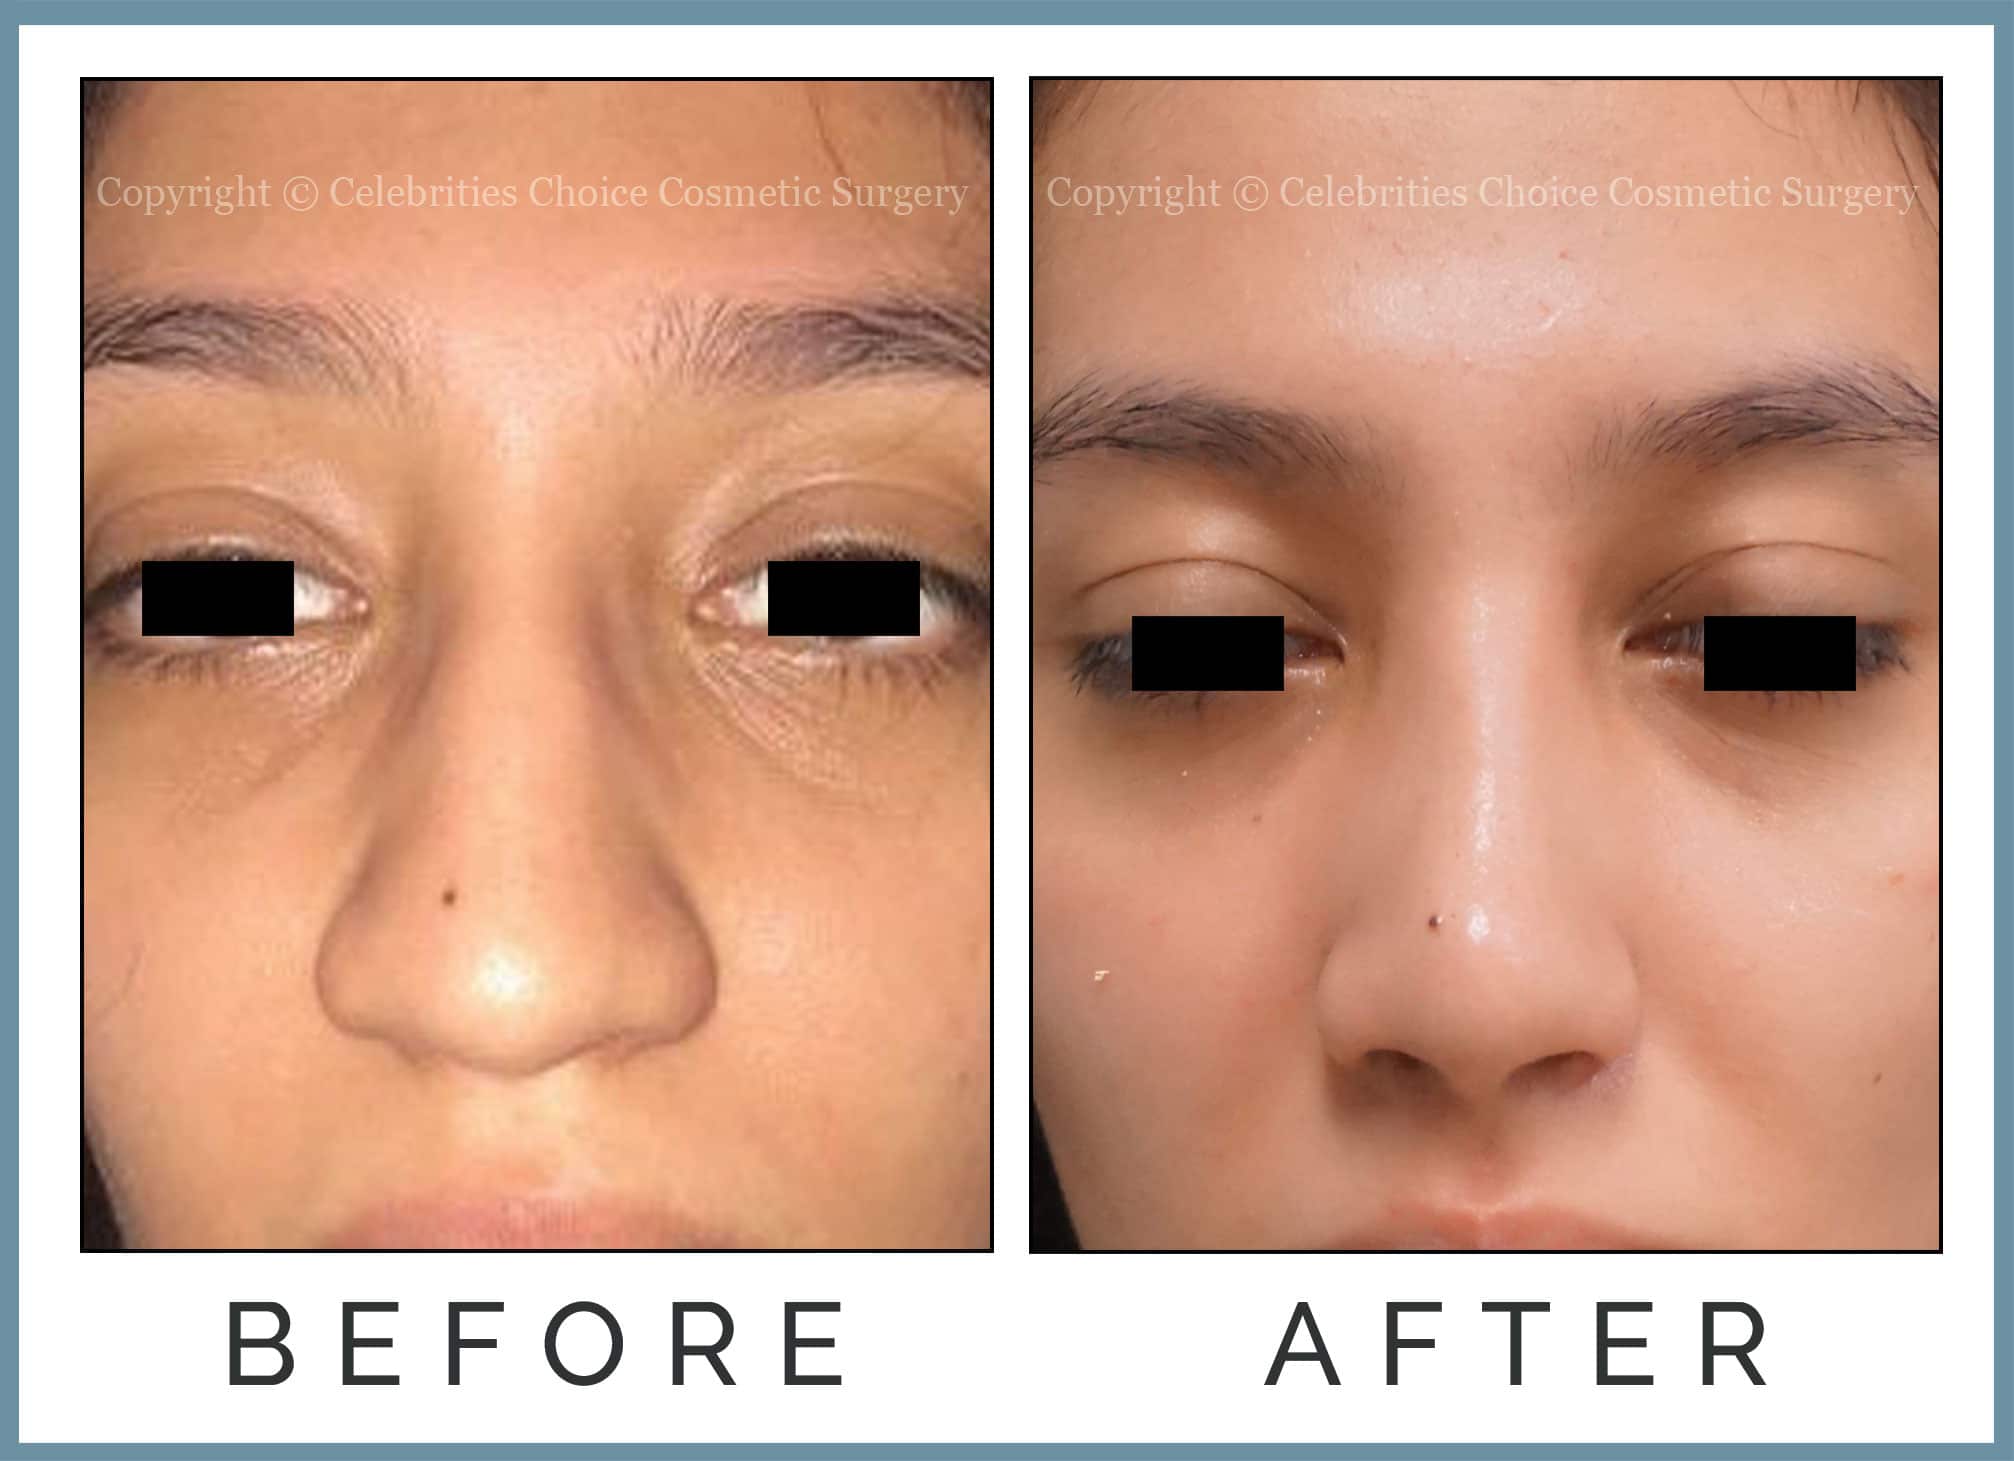 Reduction/ Augmentation Rhinoplasty through a closed technique with Cartilage Grafting with Nostril Contouring